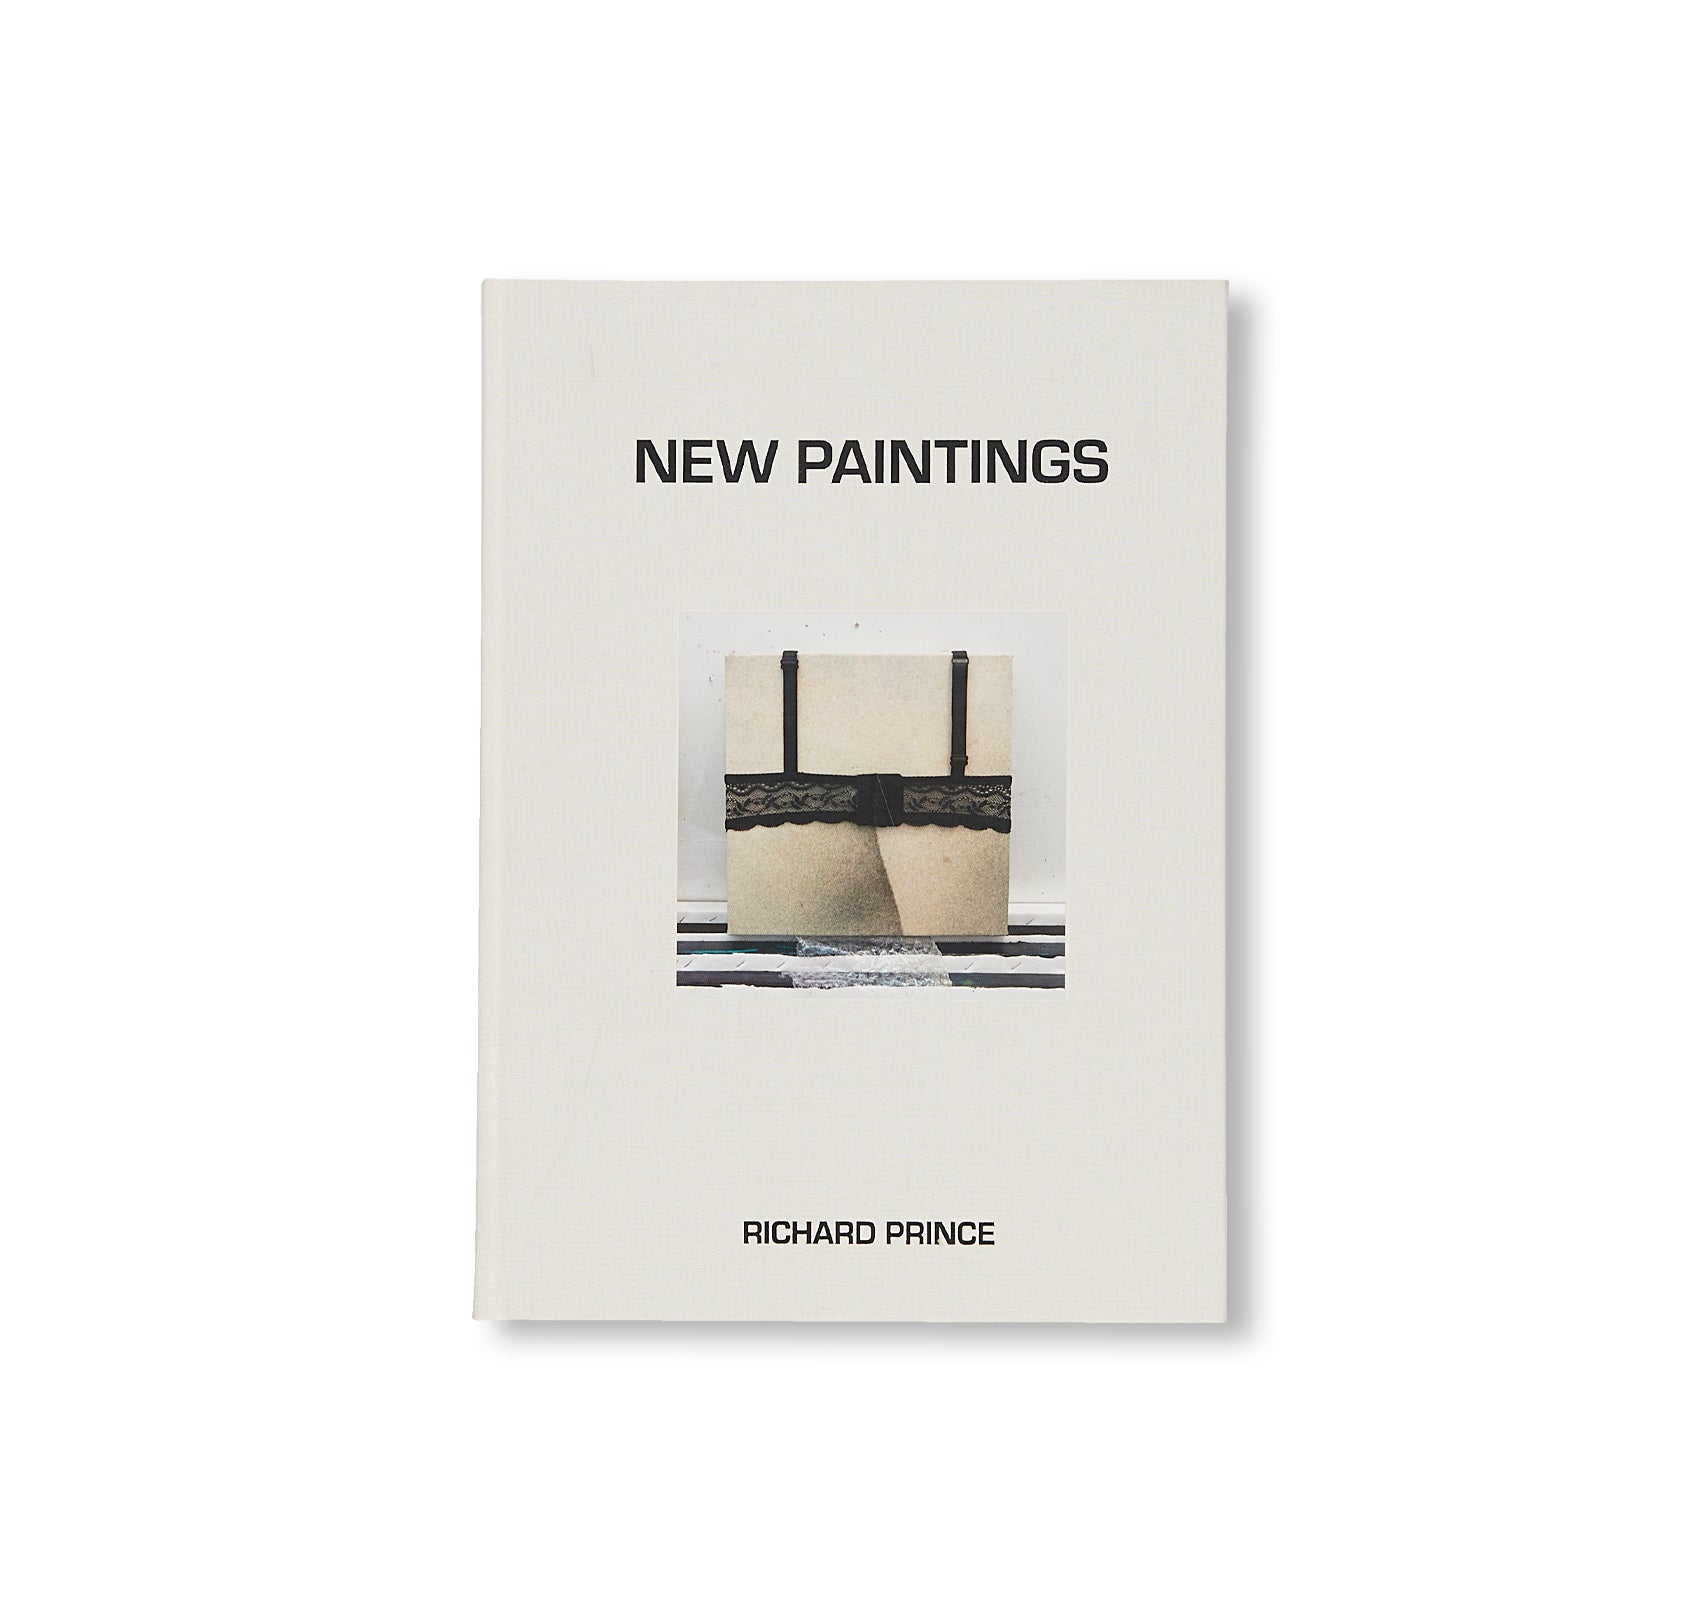 NEW PAINTINGS by Richard Prince